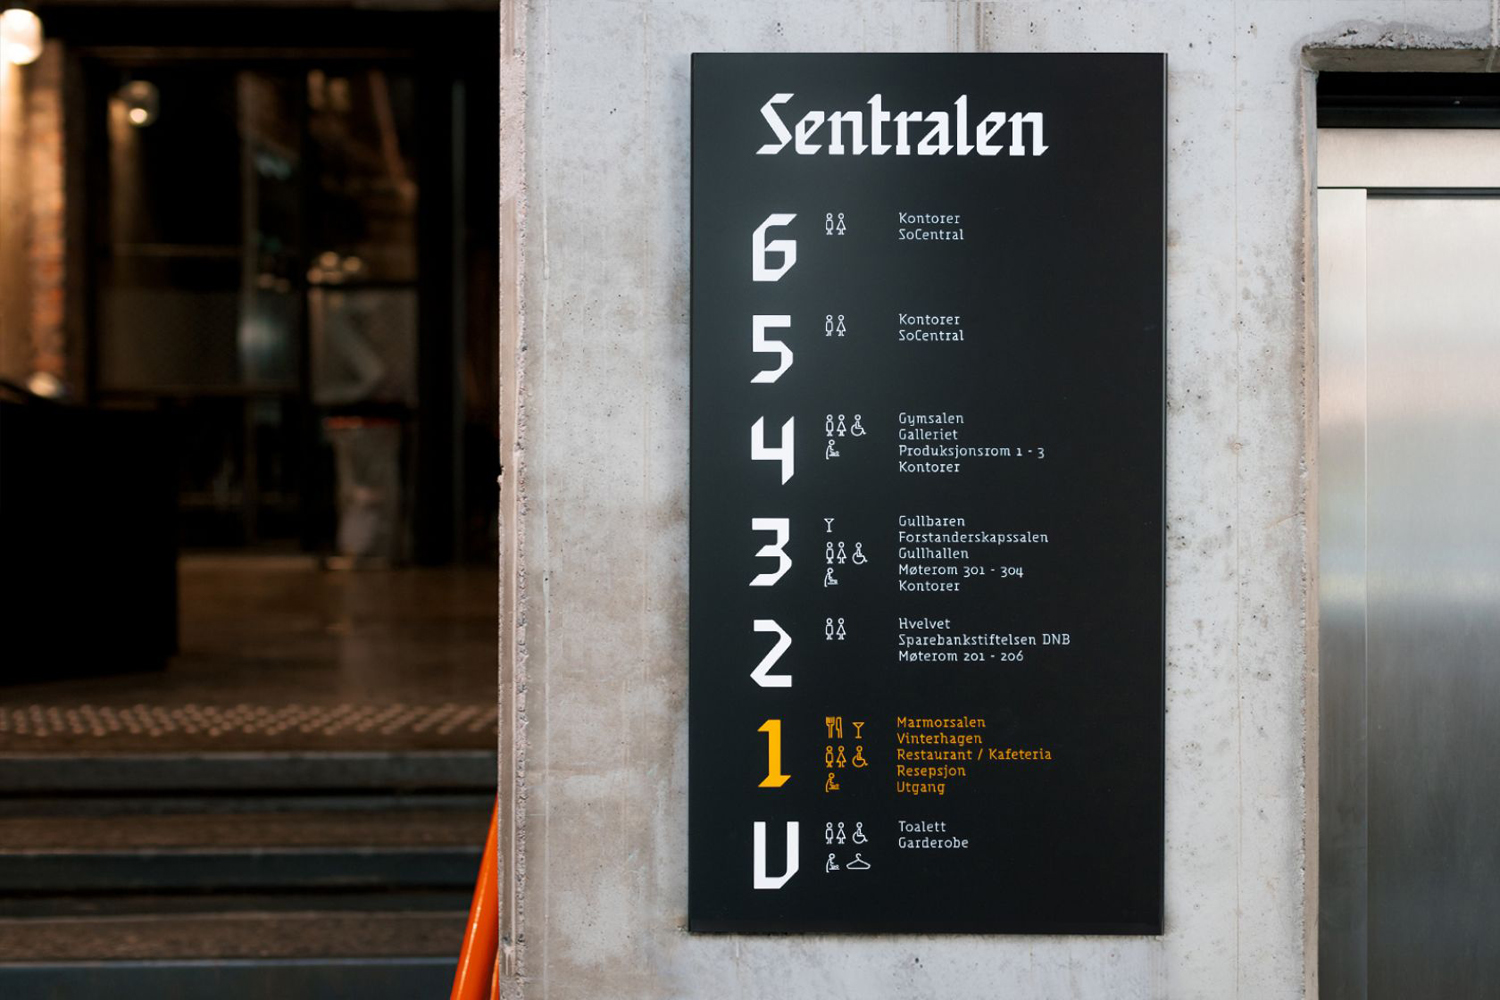 Brand identity and wayfinding for Oslo-based cultural centre and co-working space Sentralen by Metric Design, Norway